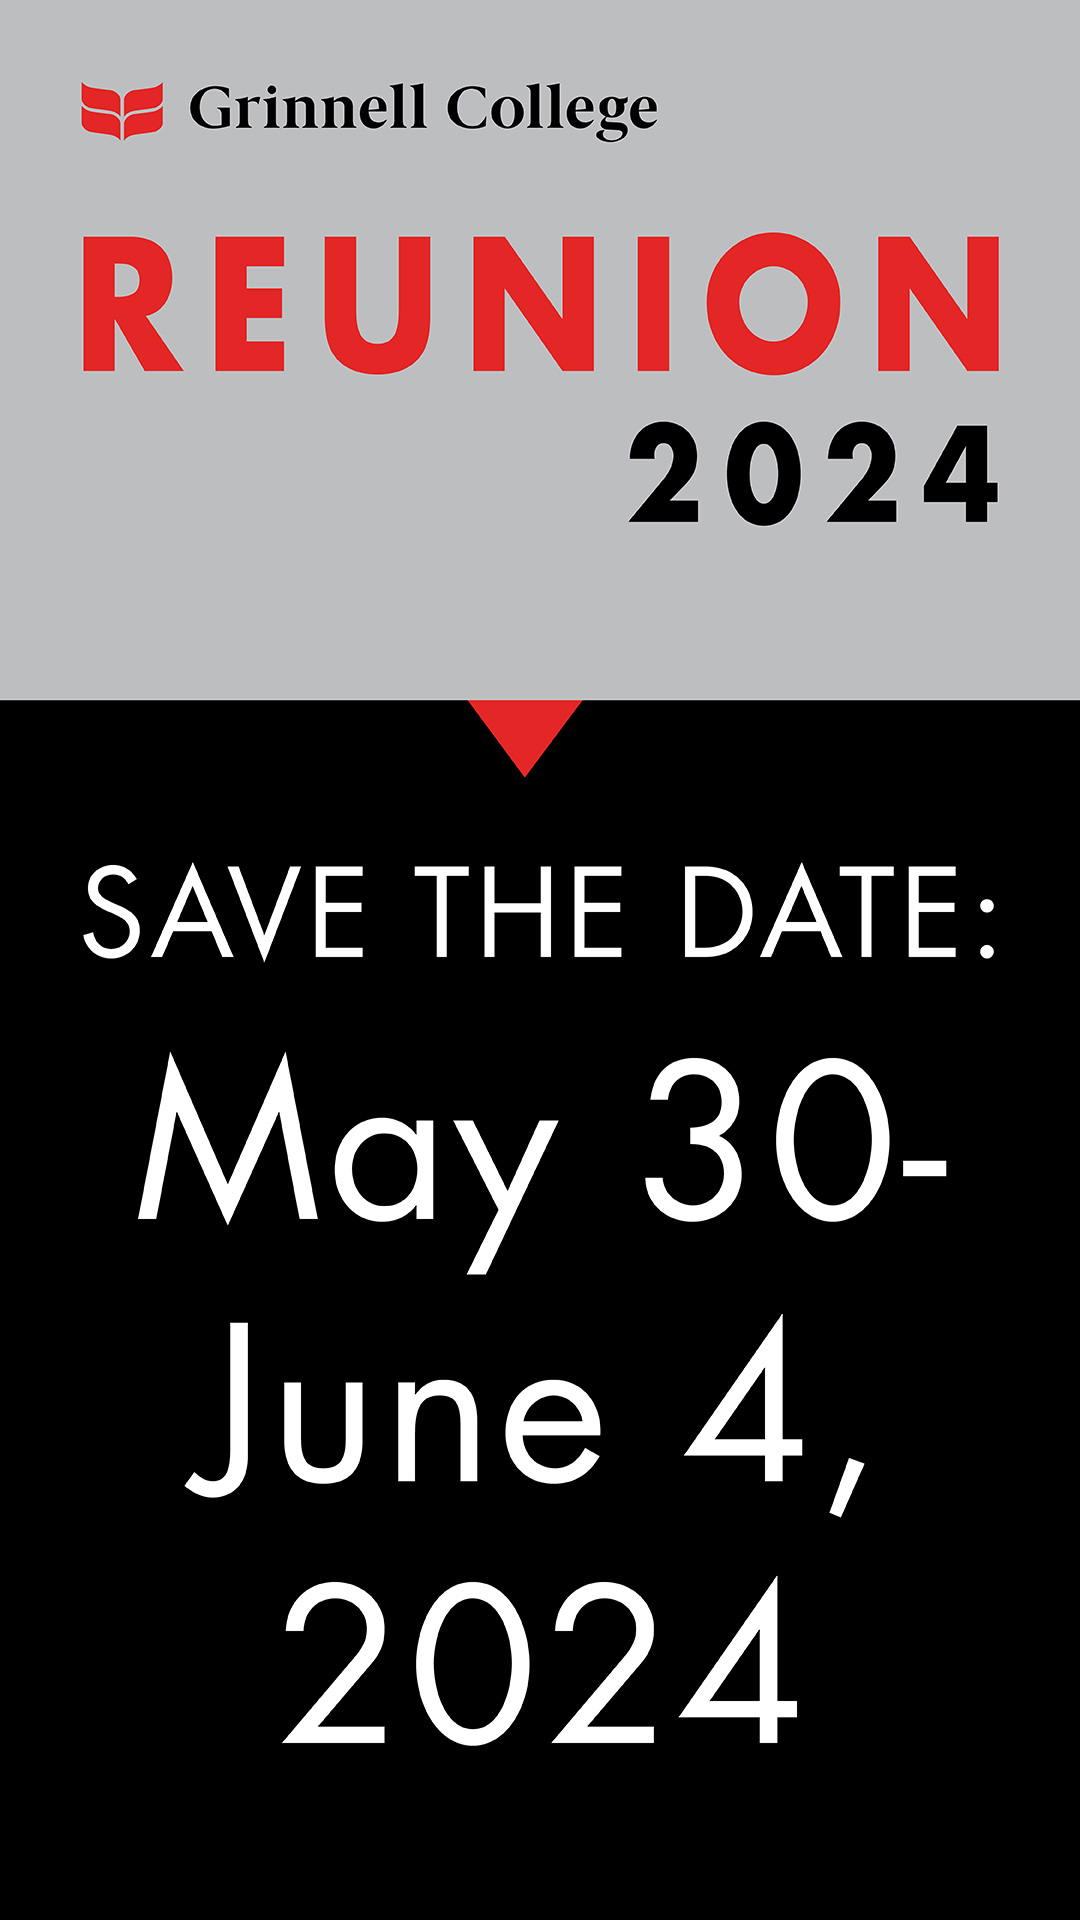 Two sections of text. First section Red and Black text over a gray background. Text: Reunion 2024. Second section white text over black background. Text: Save the date: May 30-June 4, 2023.